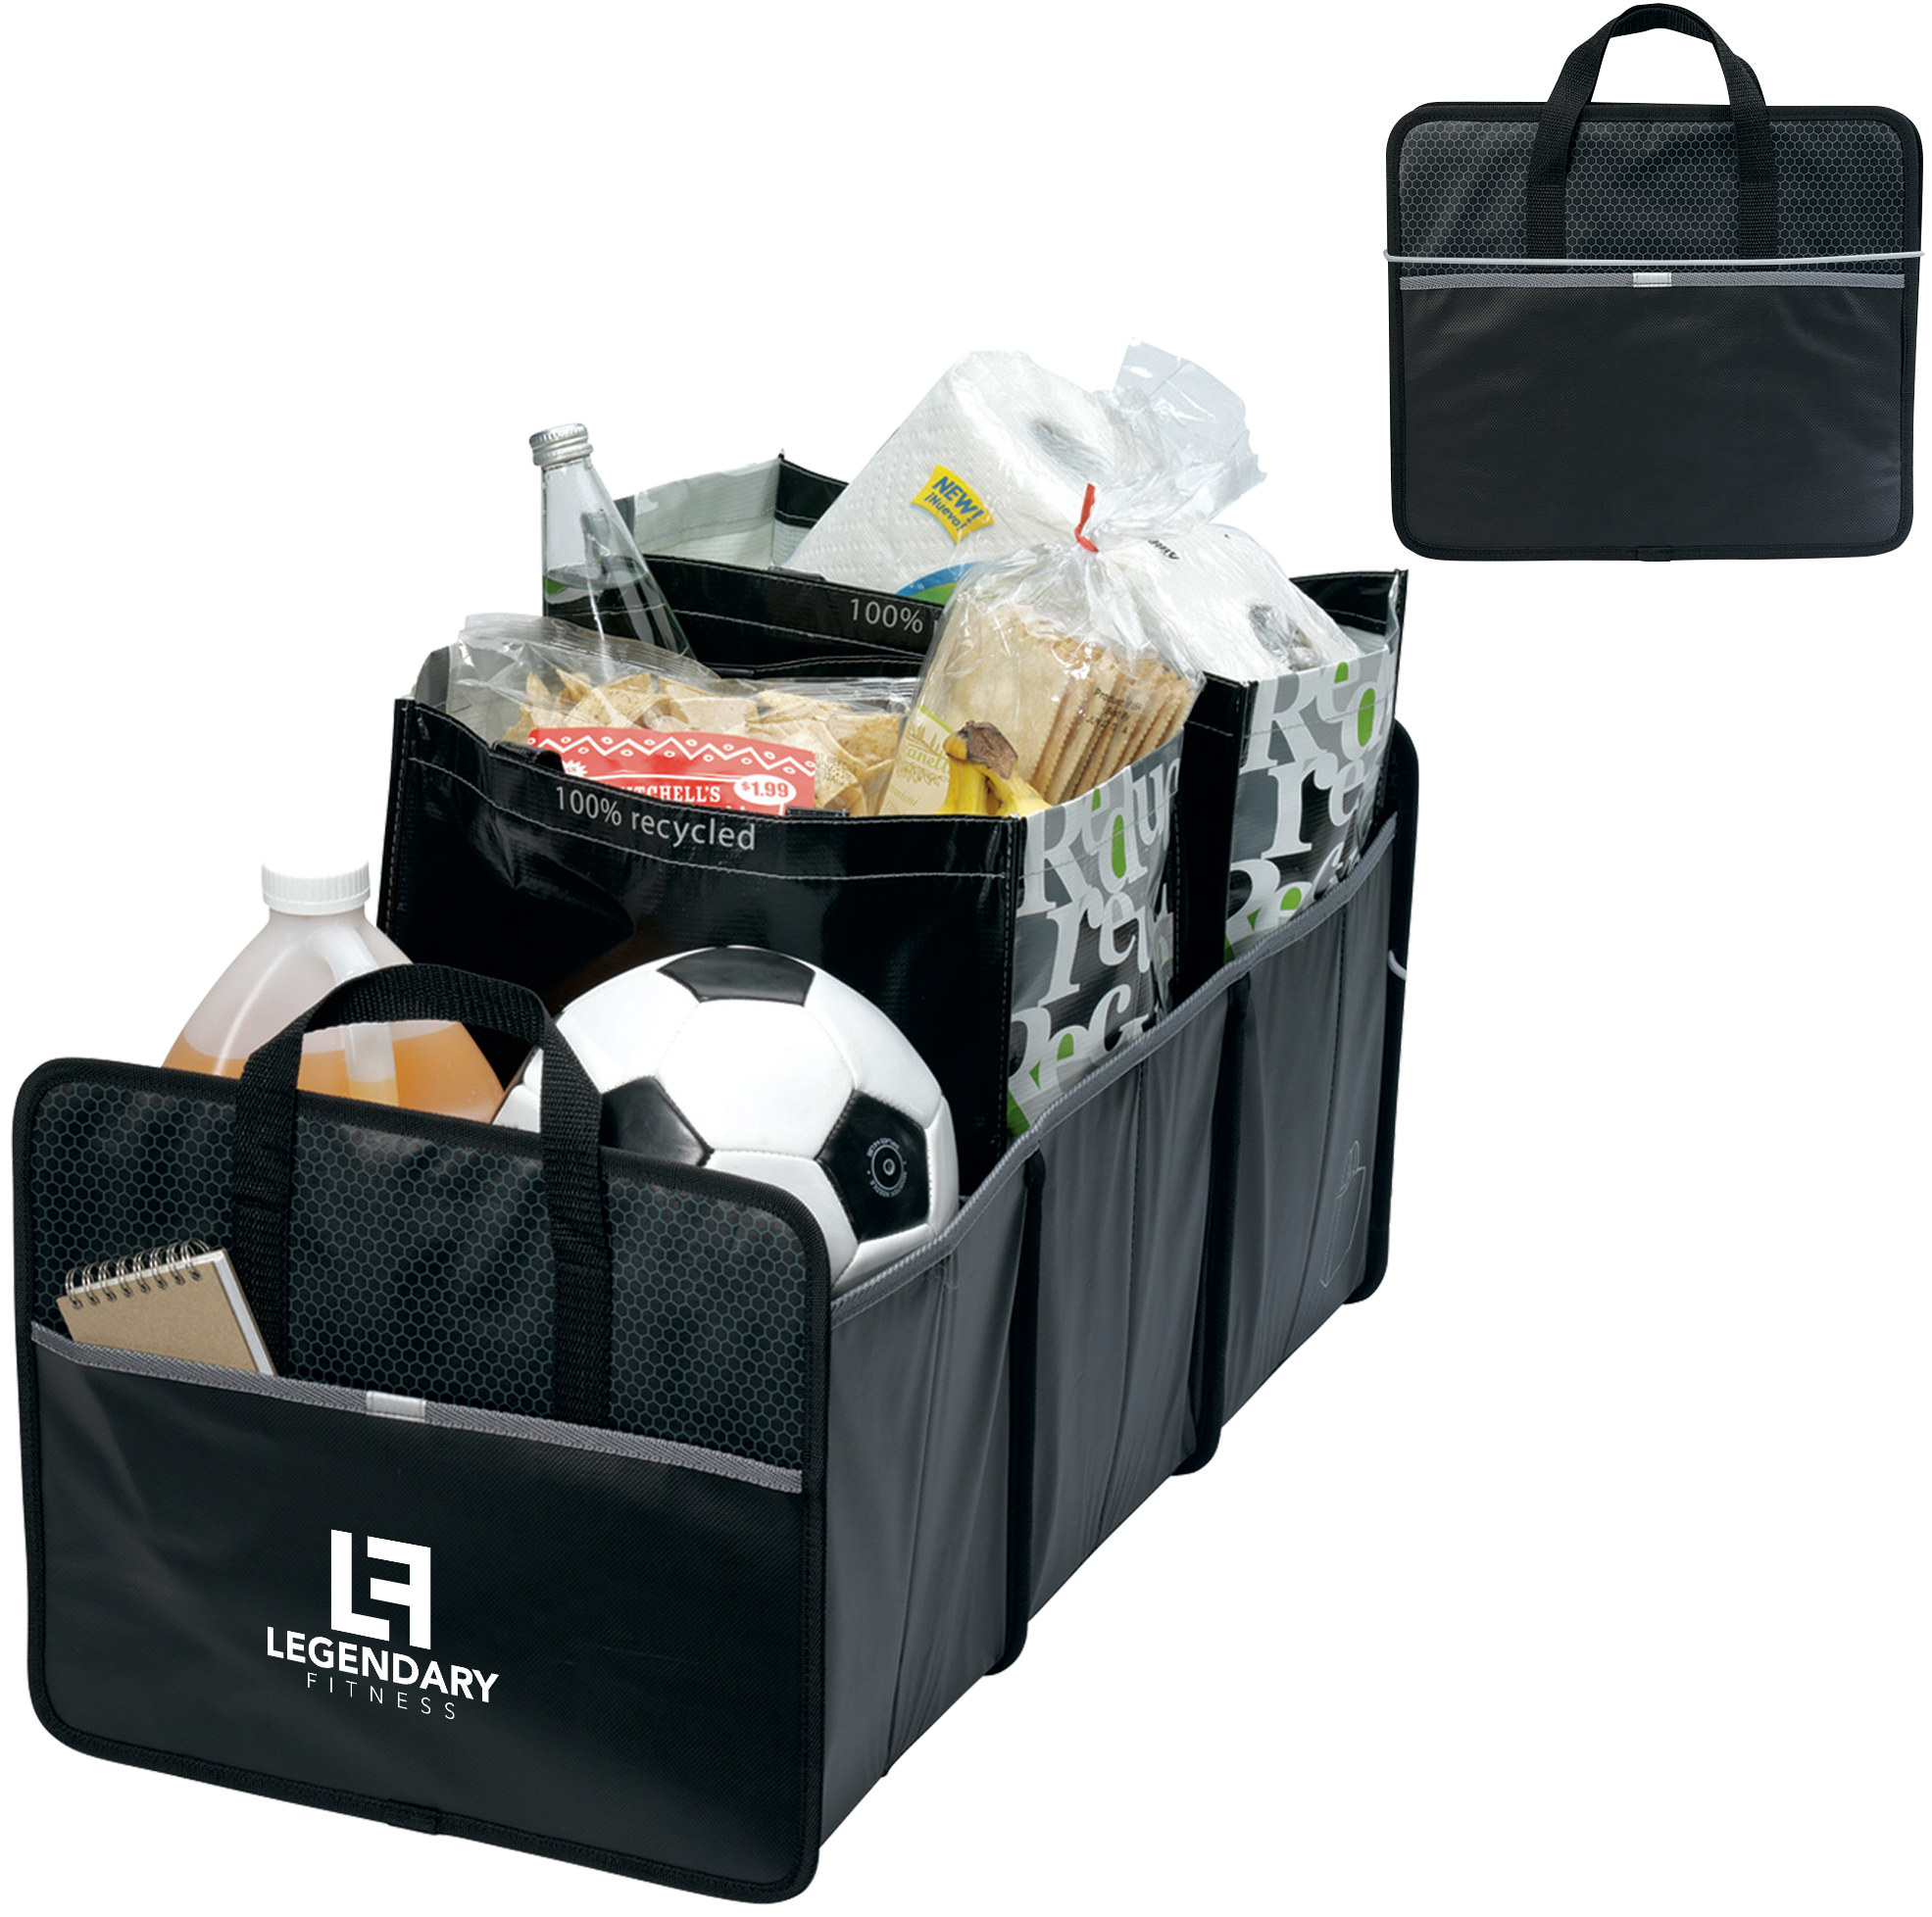 Promotional Auto Organizers  Promotional Trunk Organizers